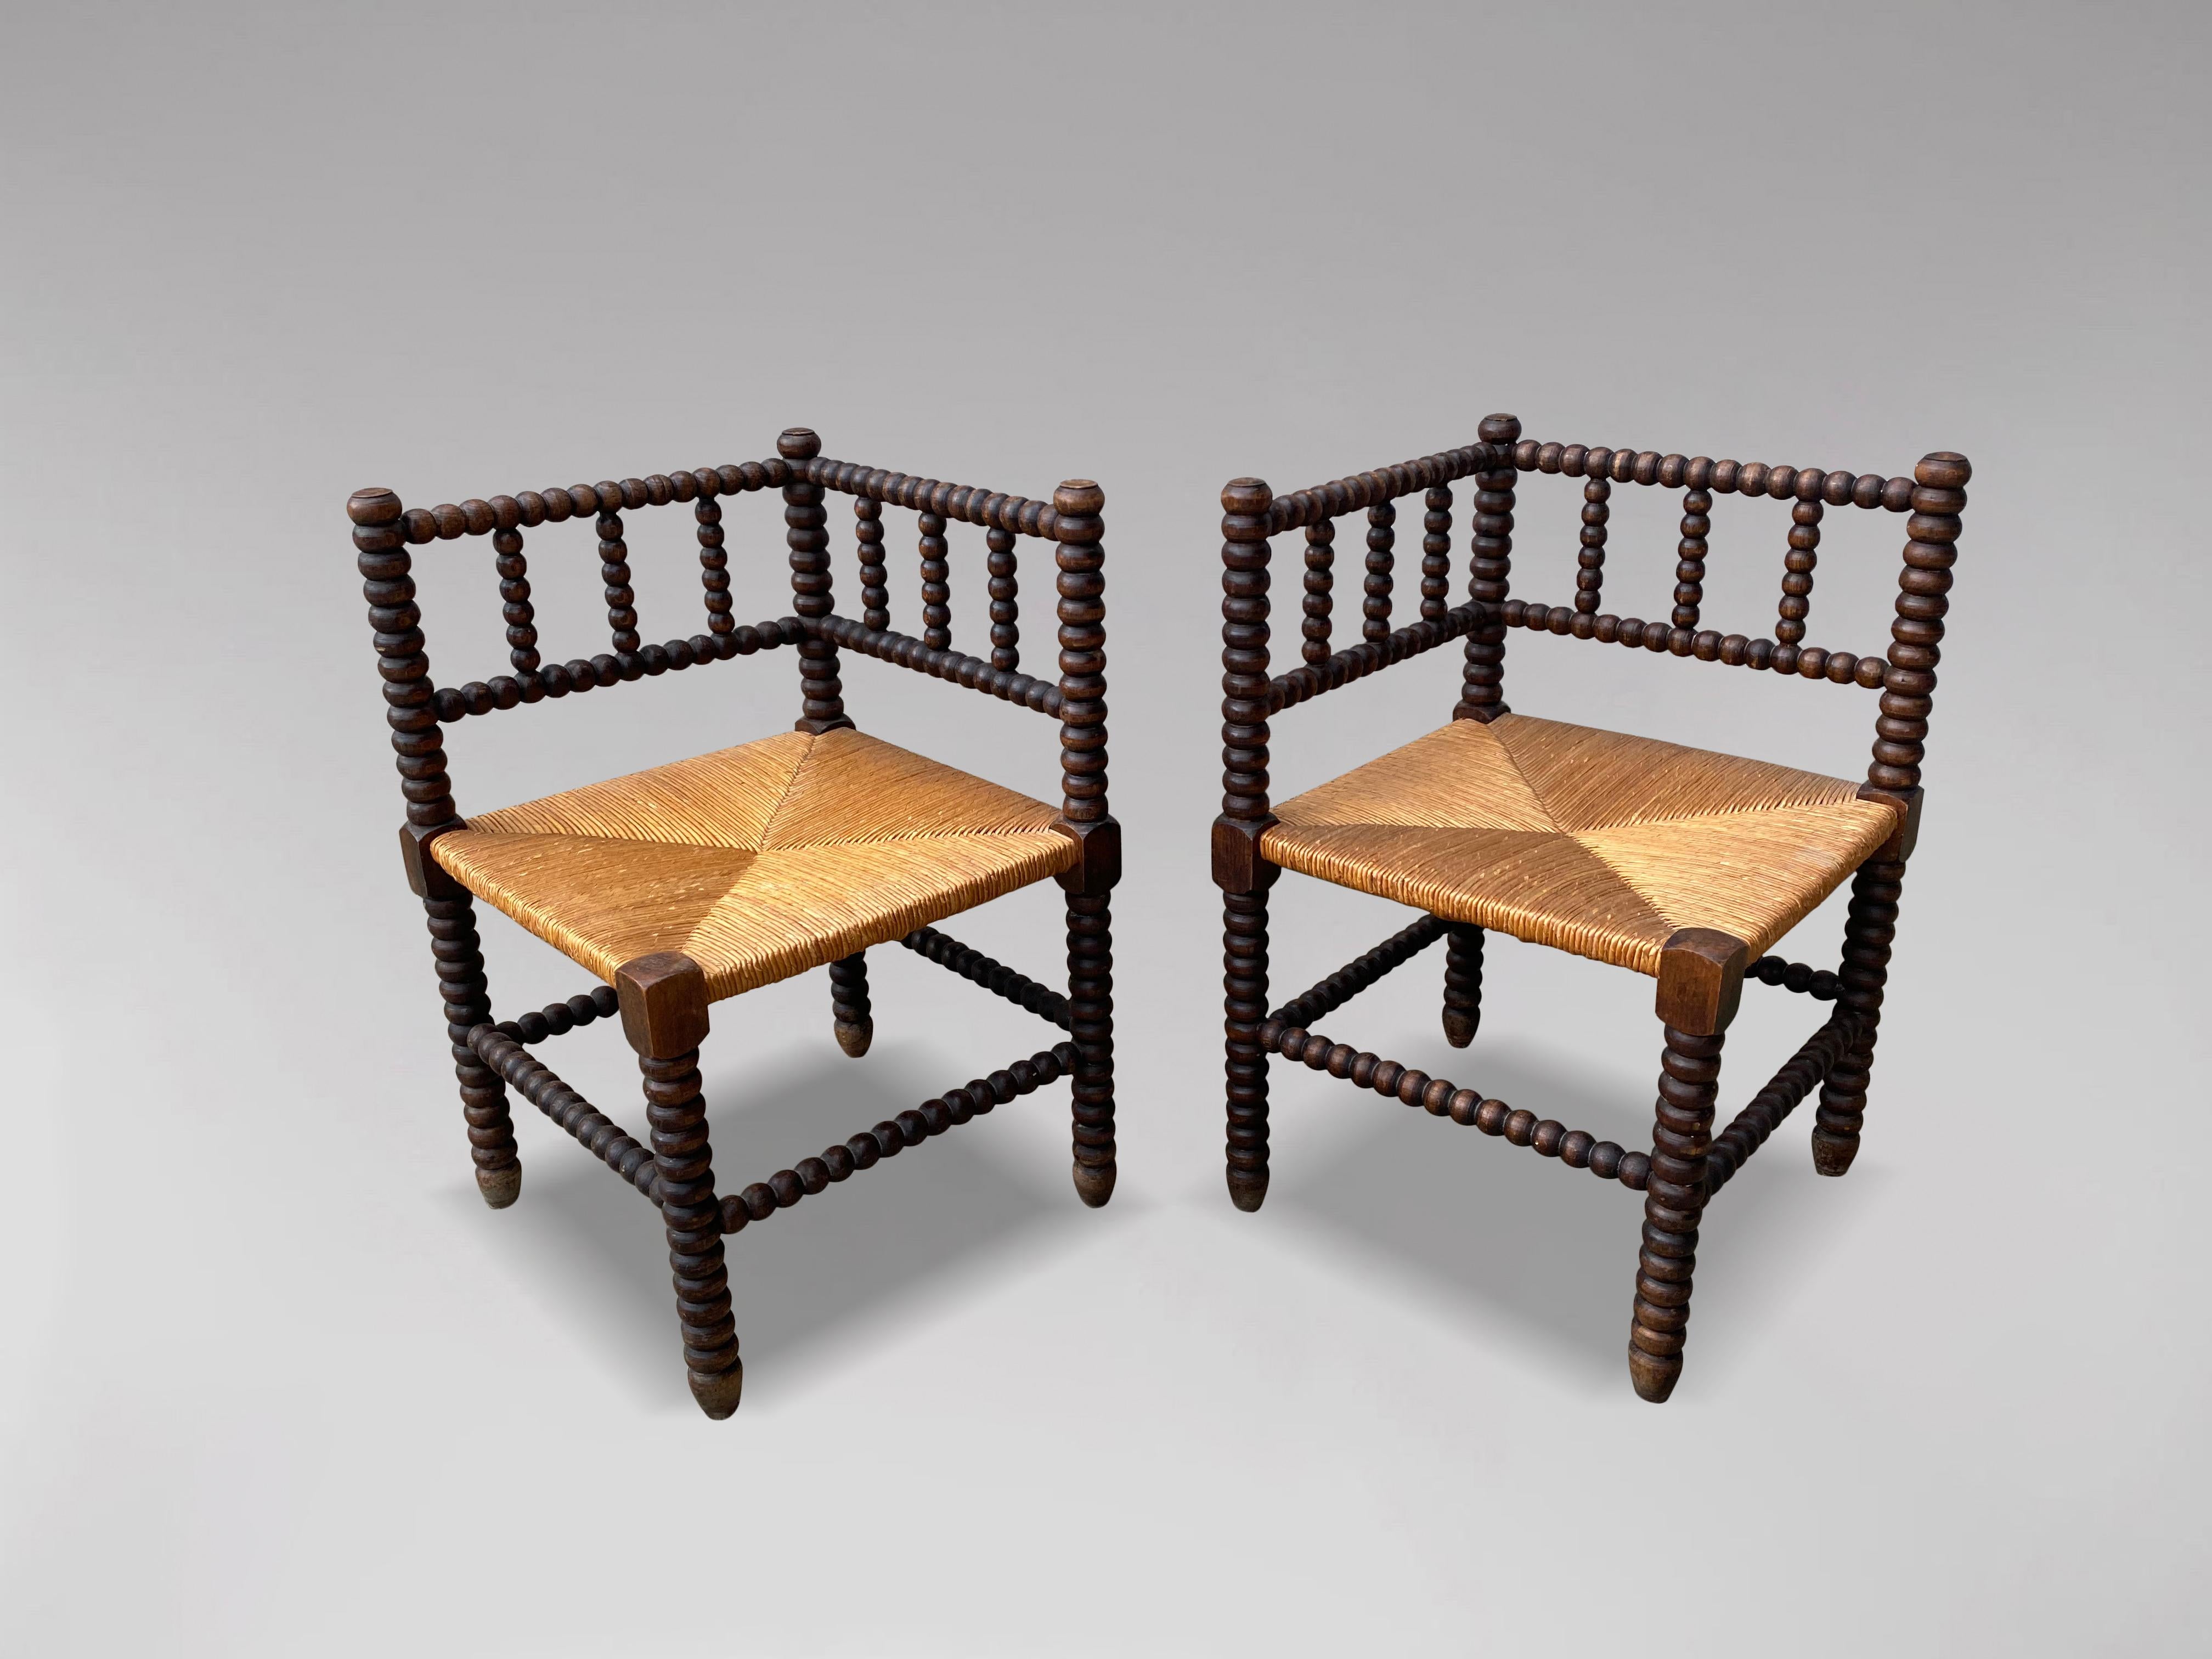 A charming pair of late 19th century French provincial bobbin wood corner chairs. Beautifully turned oak frames with the original striped rush seats. Sourced from the south of France and in very good antique condition. Seat height is 37cm.

The